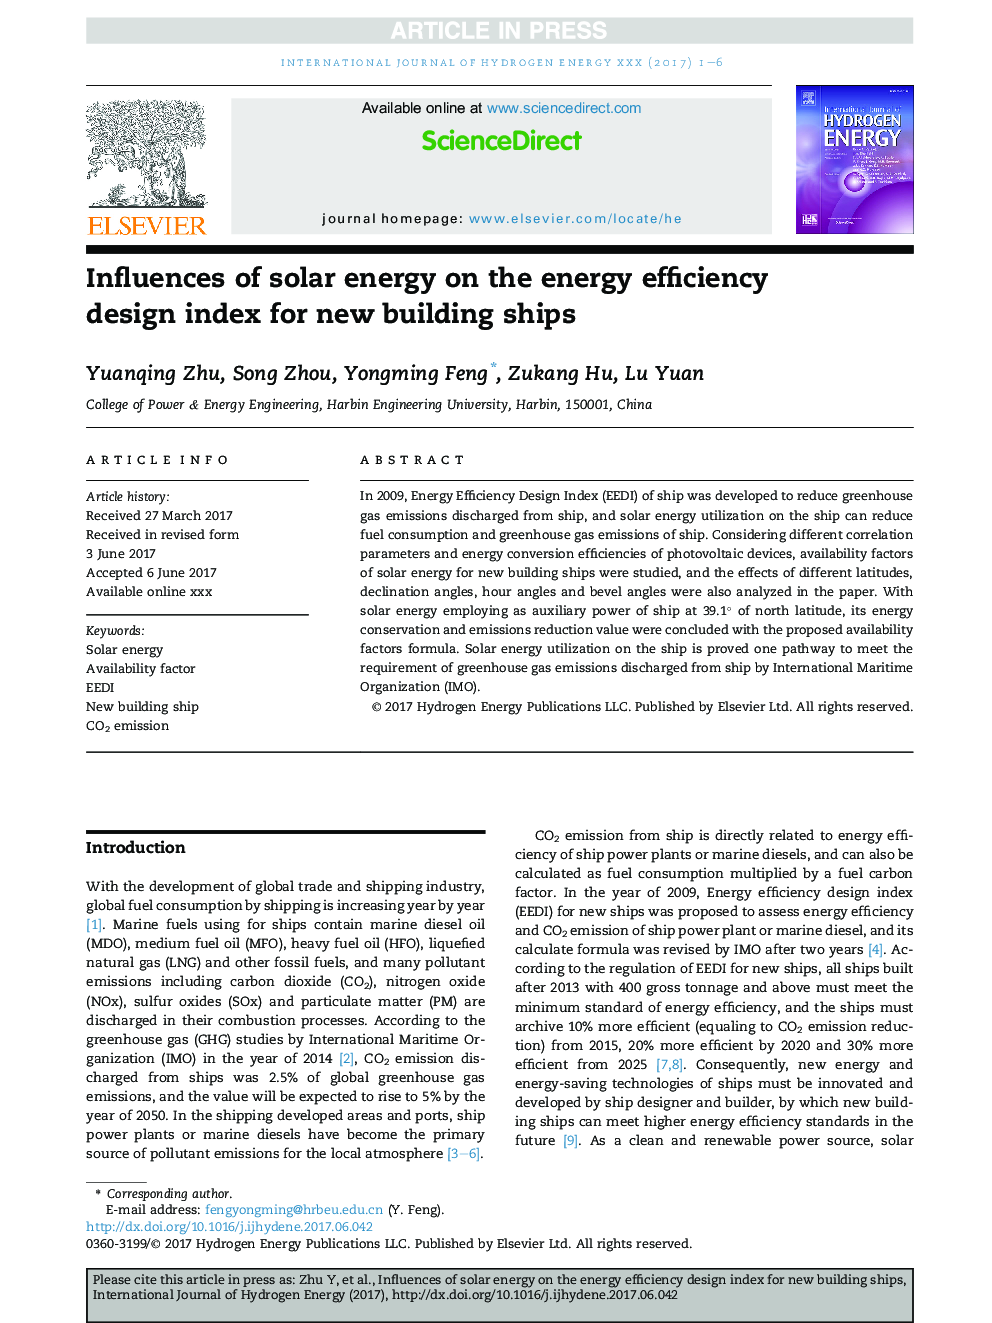 Influences of solar energy on the energy efficiency design index for new building ships